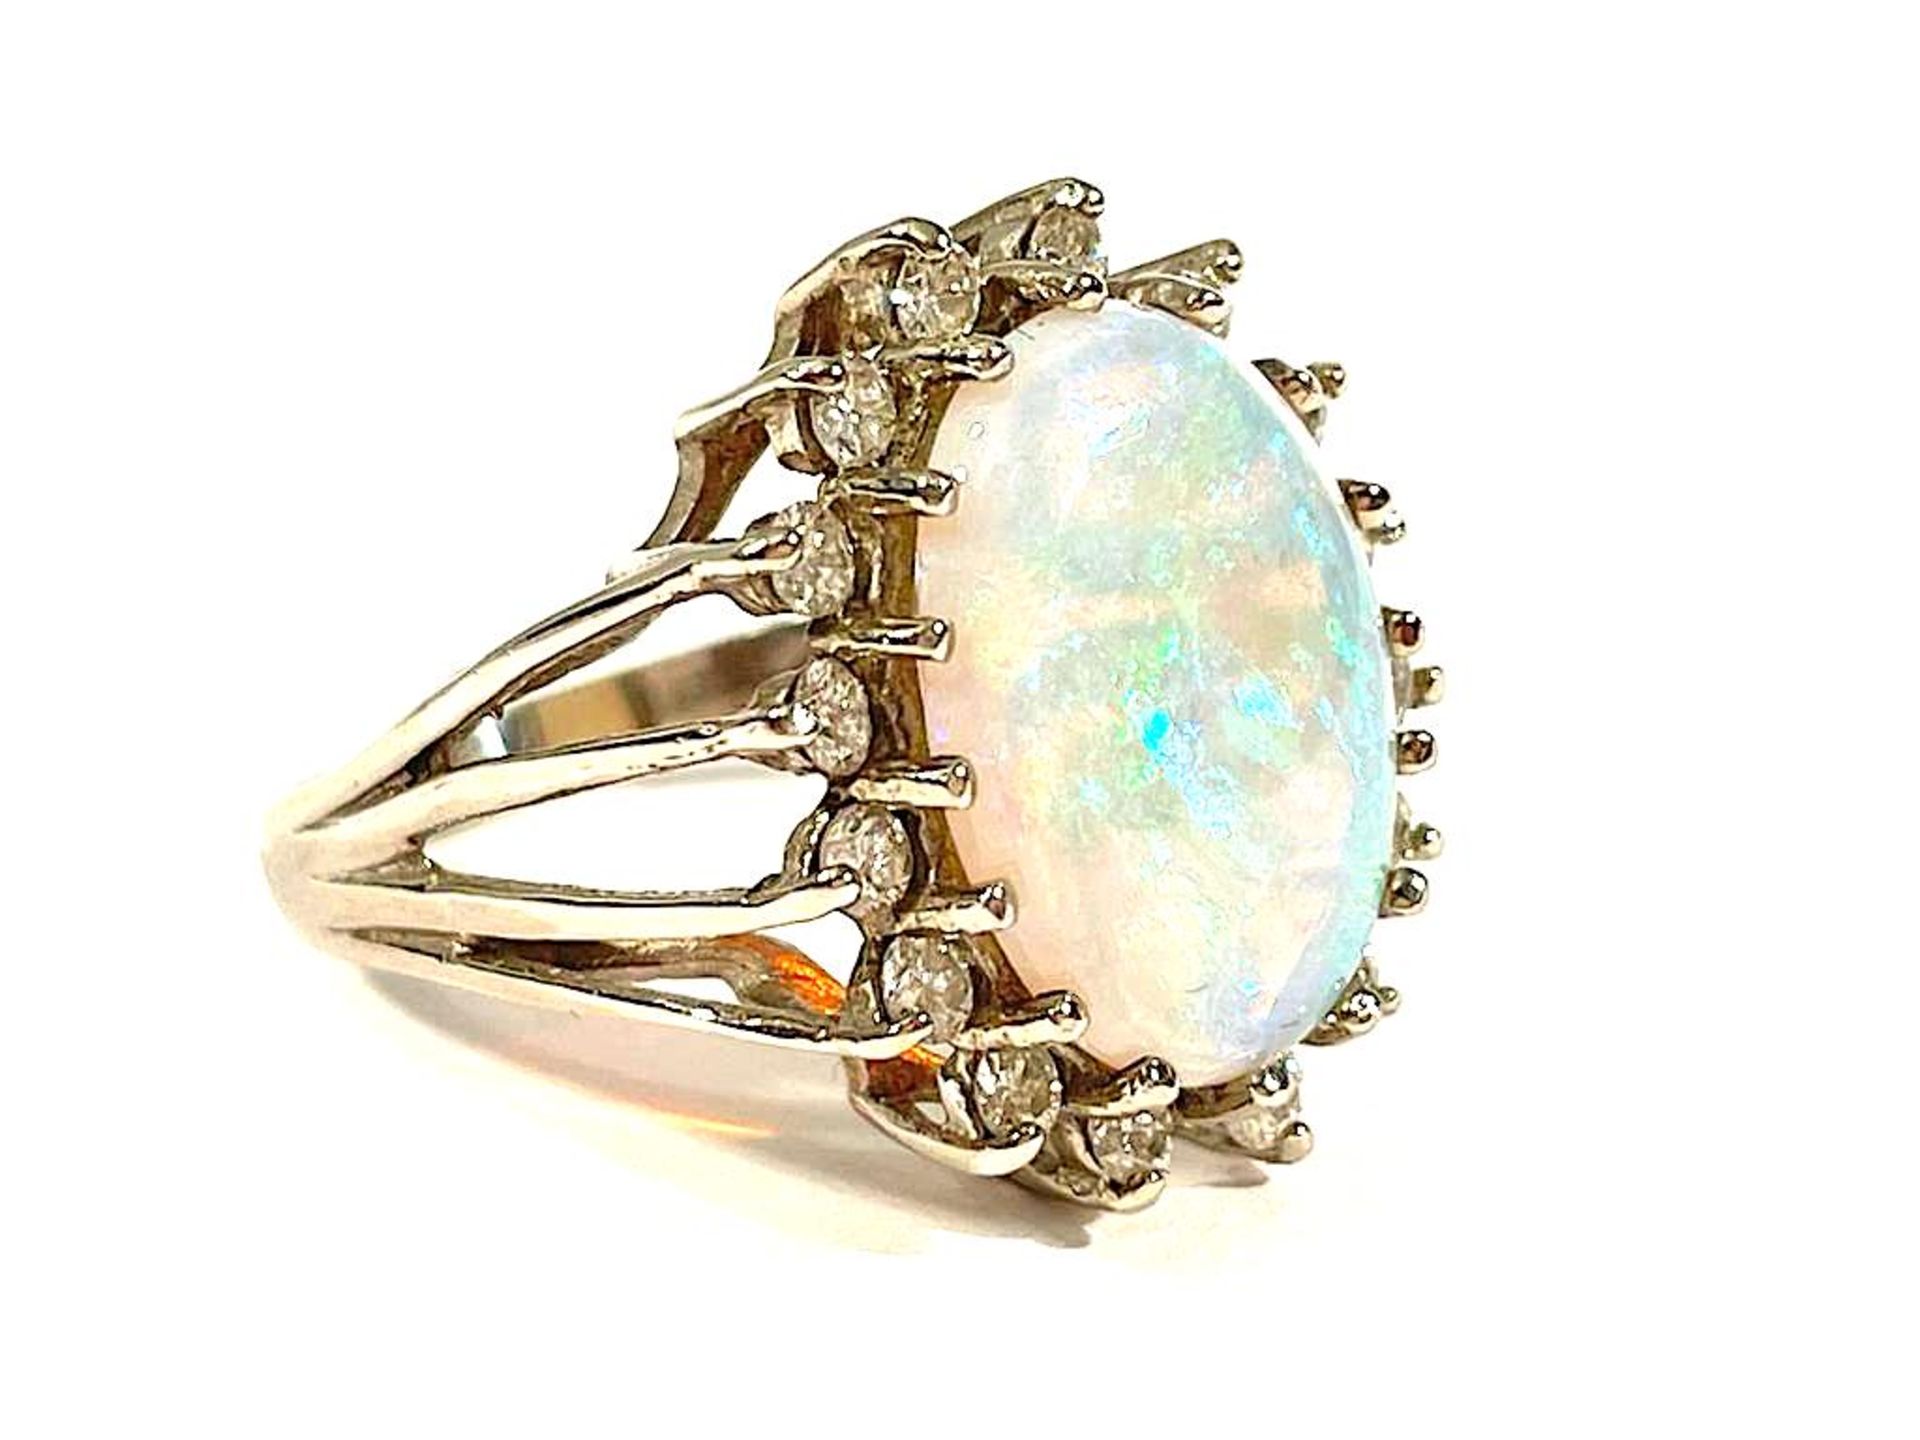 Opal ring - Image 10 of 12